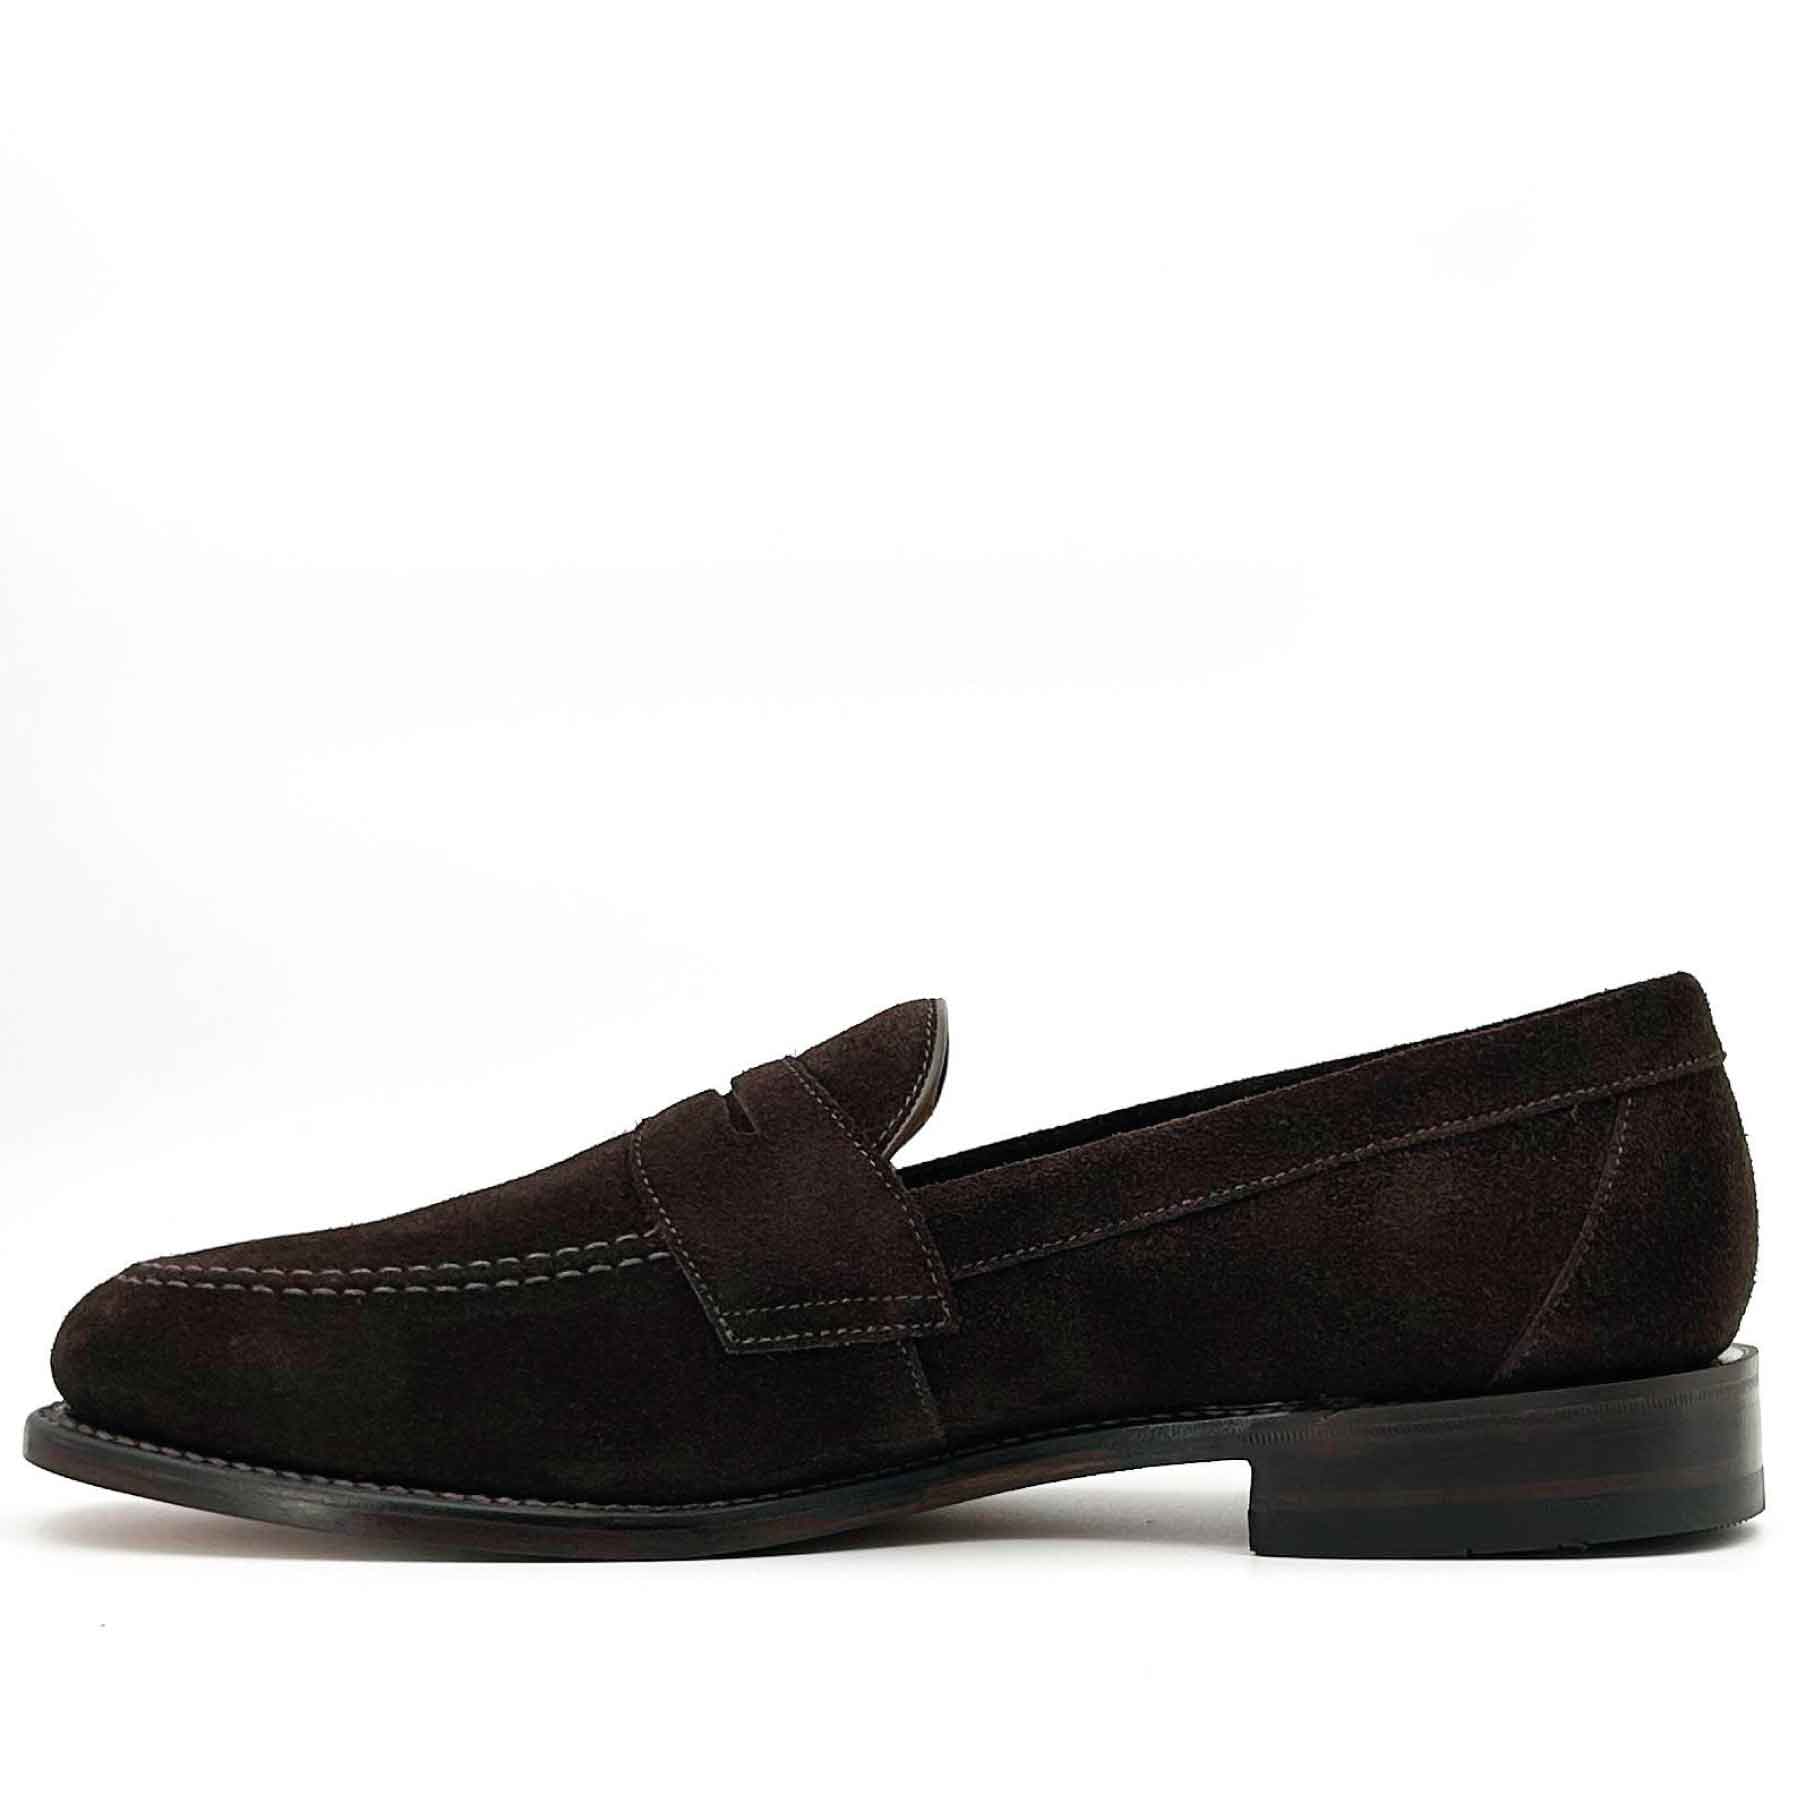 Imperial Choc Brown Suede Apron Penny Loafer